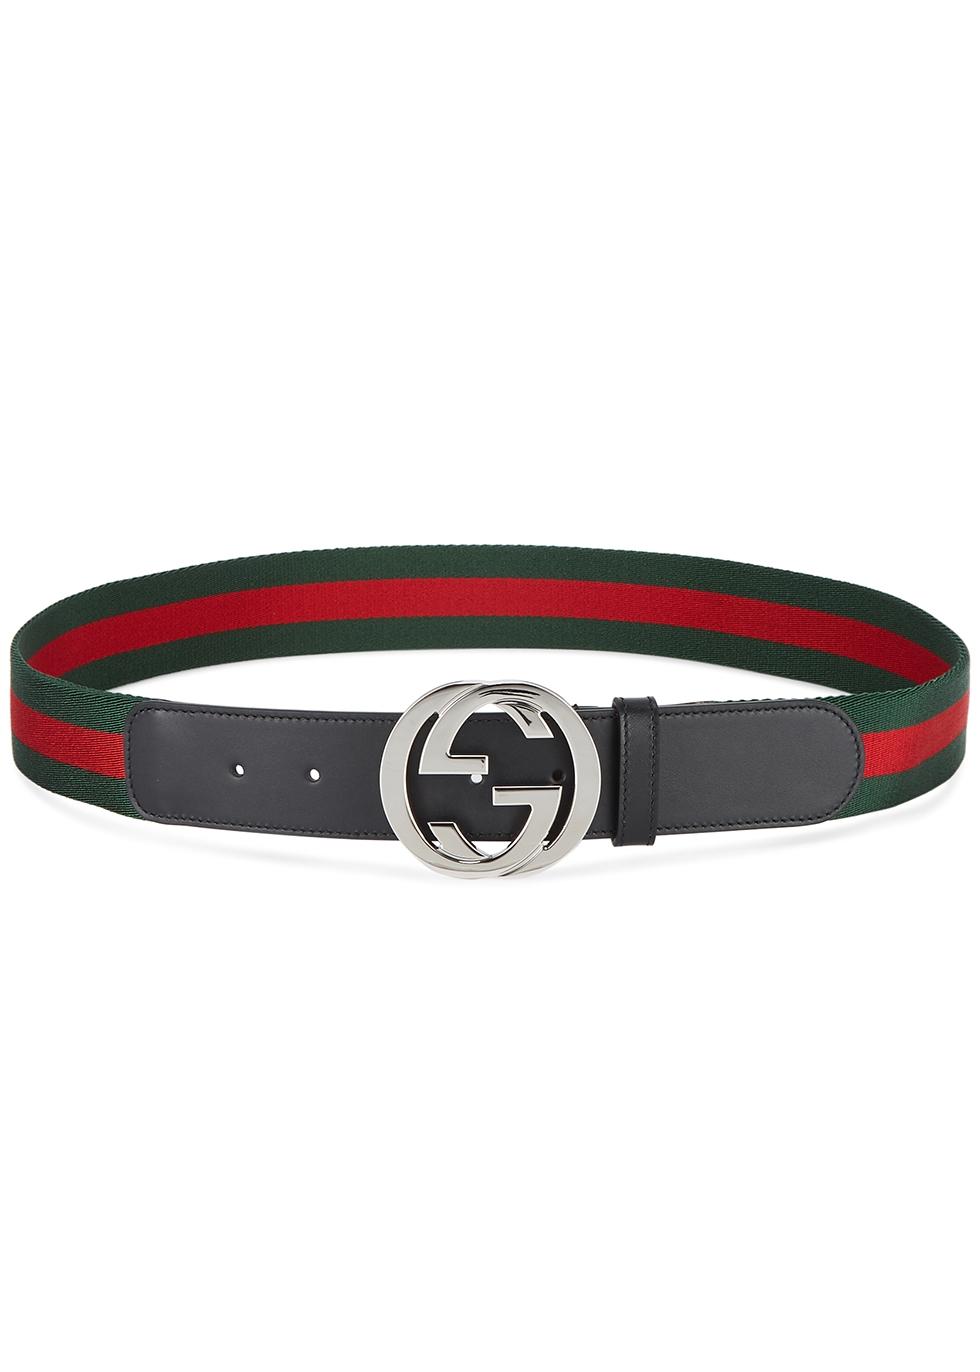 Gucci Web Belt With G Buckle in Green for Men - Save 43% - Lyst